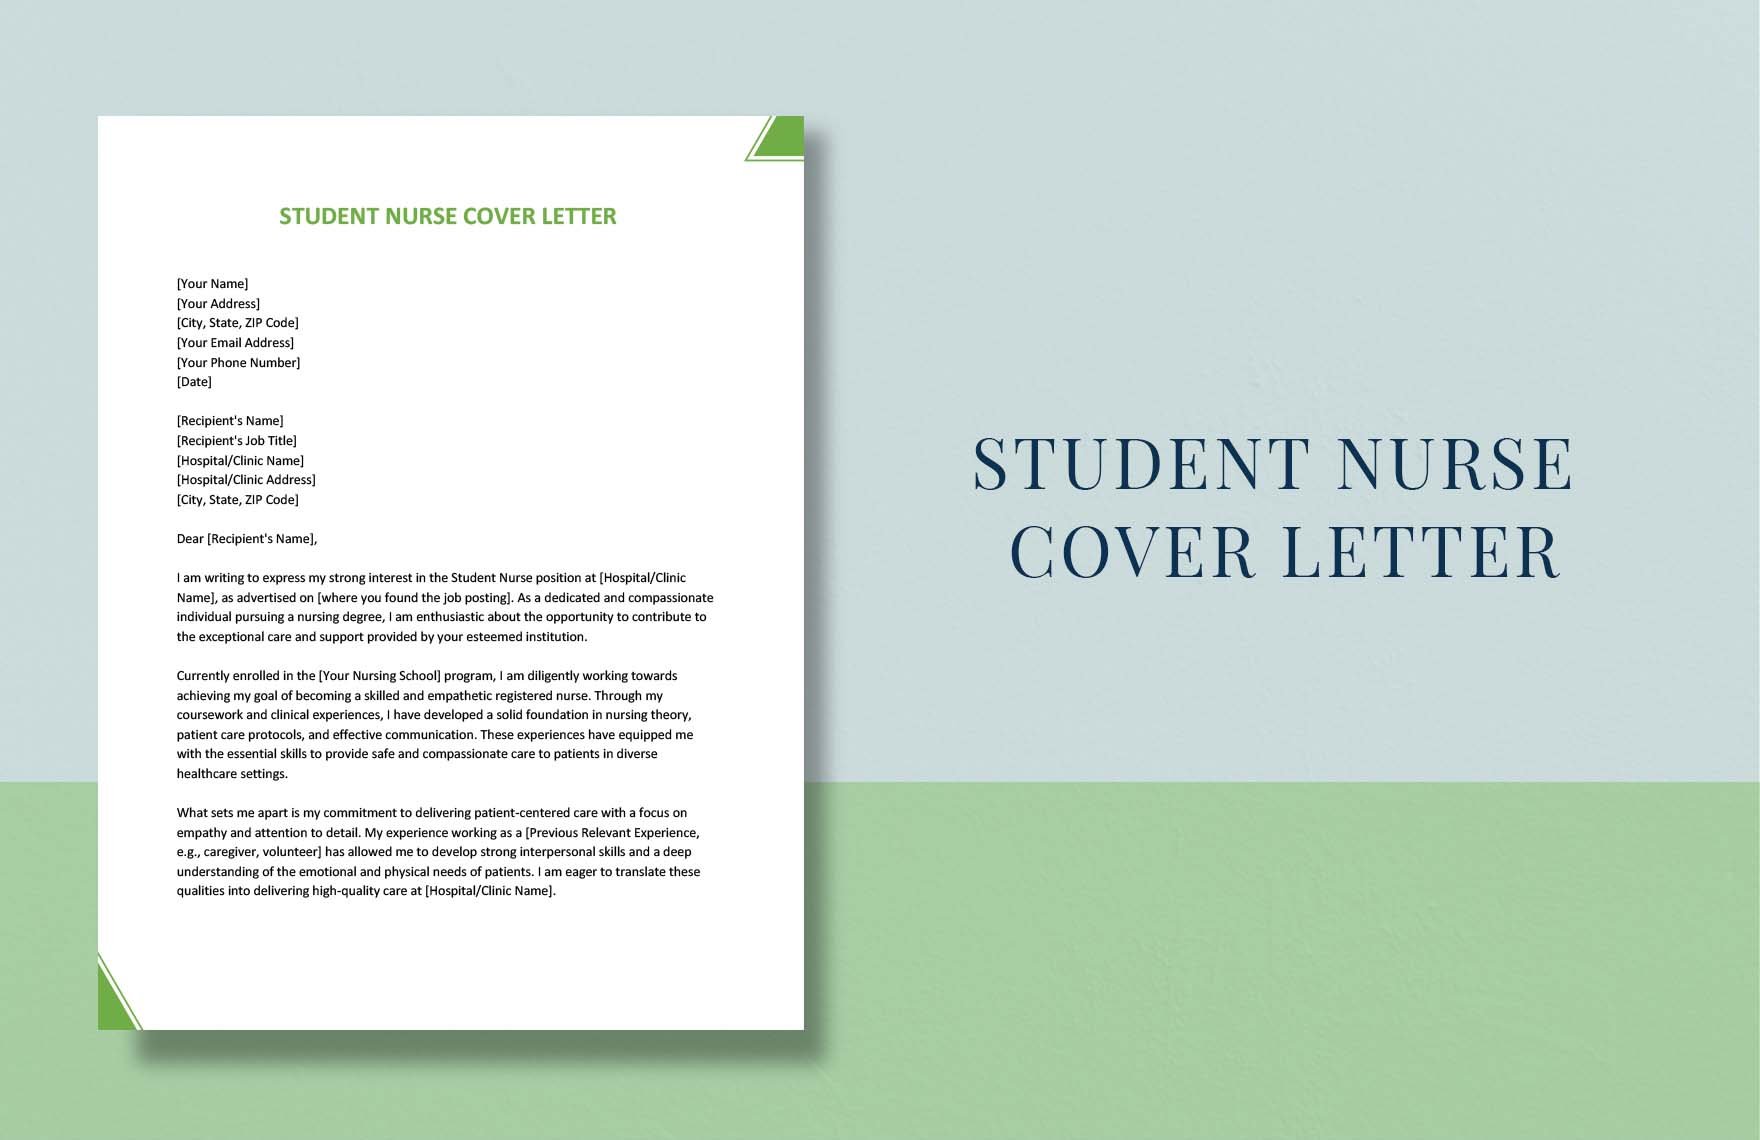 Student Nurse Cover Letter in Word, Google Docs